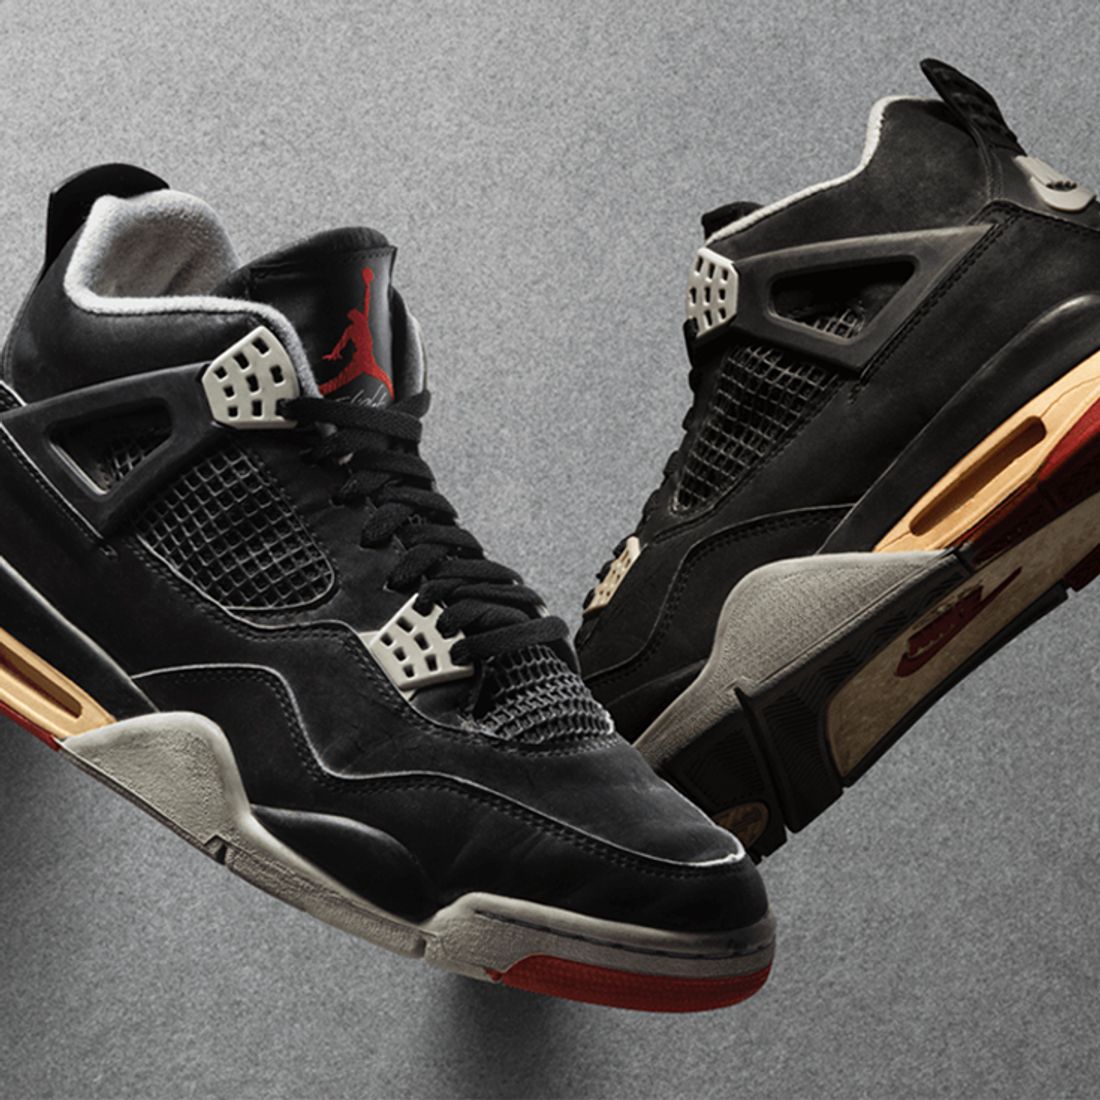 Military Black' Air Jordan 4s Are Dropping This Month